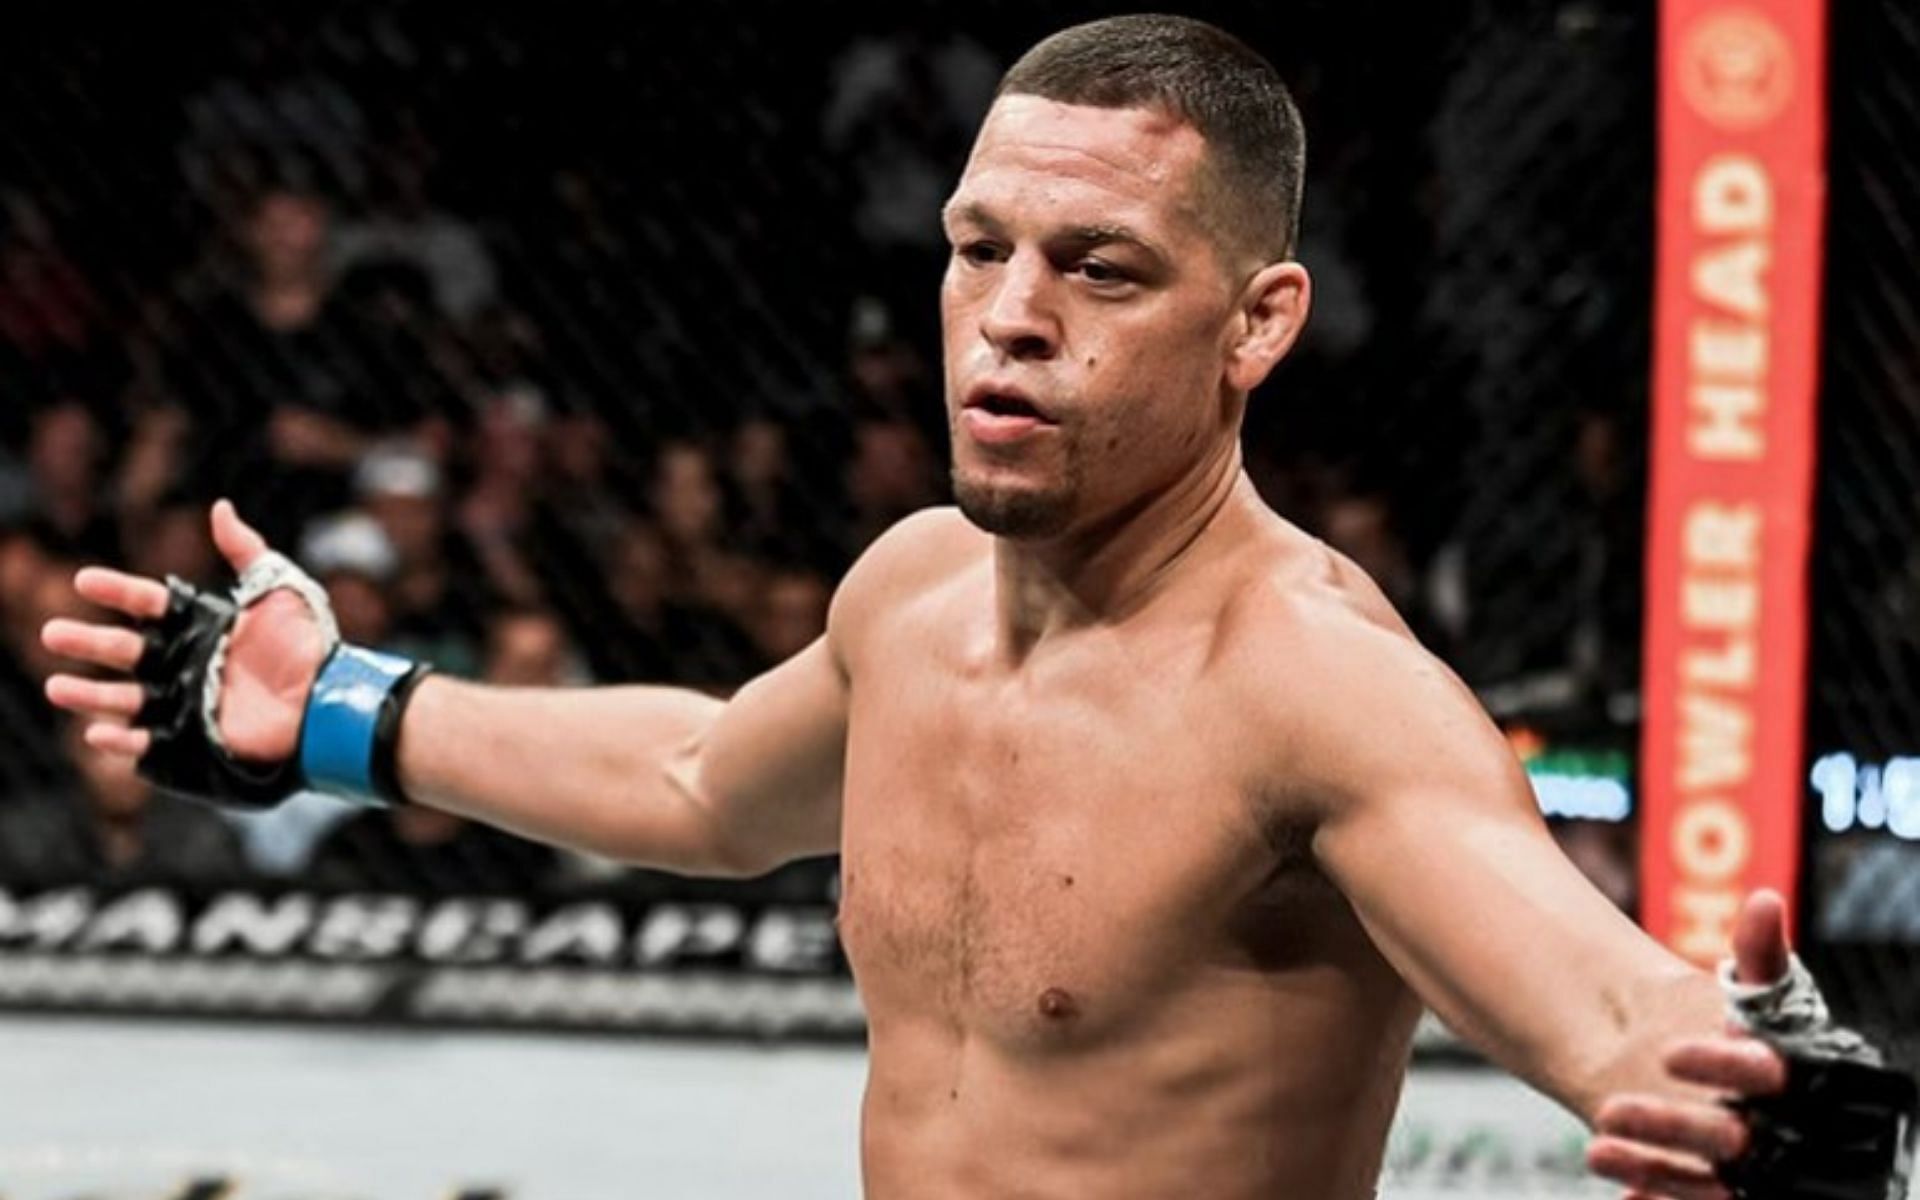 Nate Diaz continues to take shots at the UFC [via @natediaz209 on Instagram]